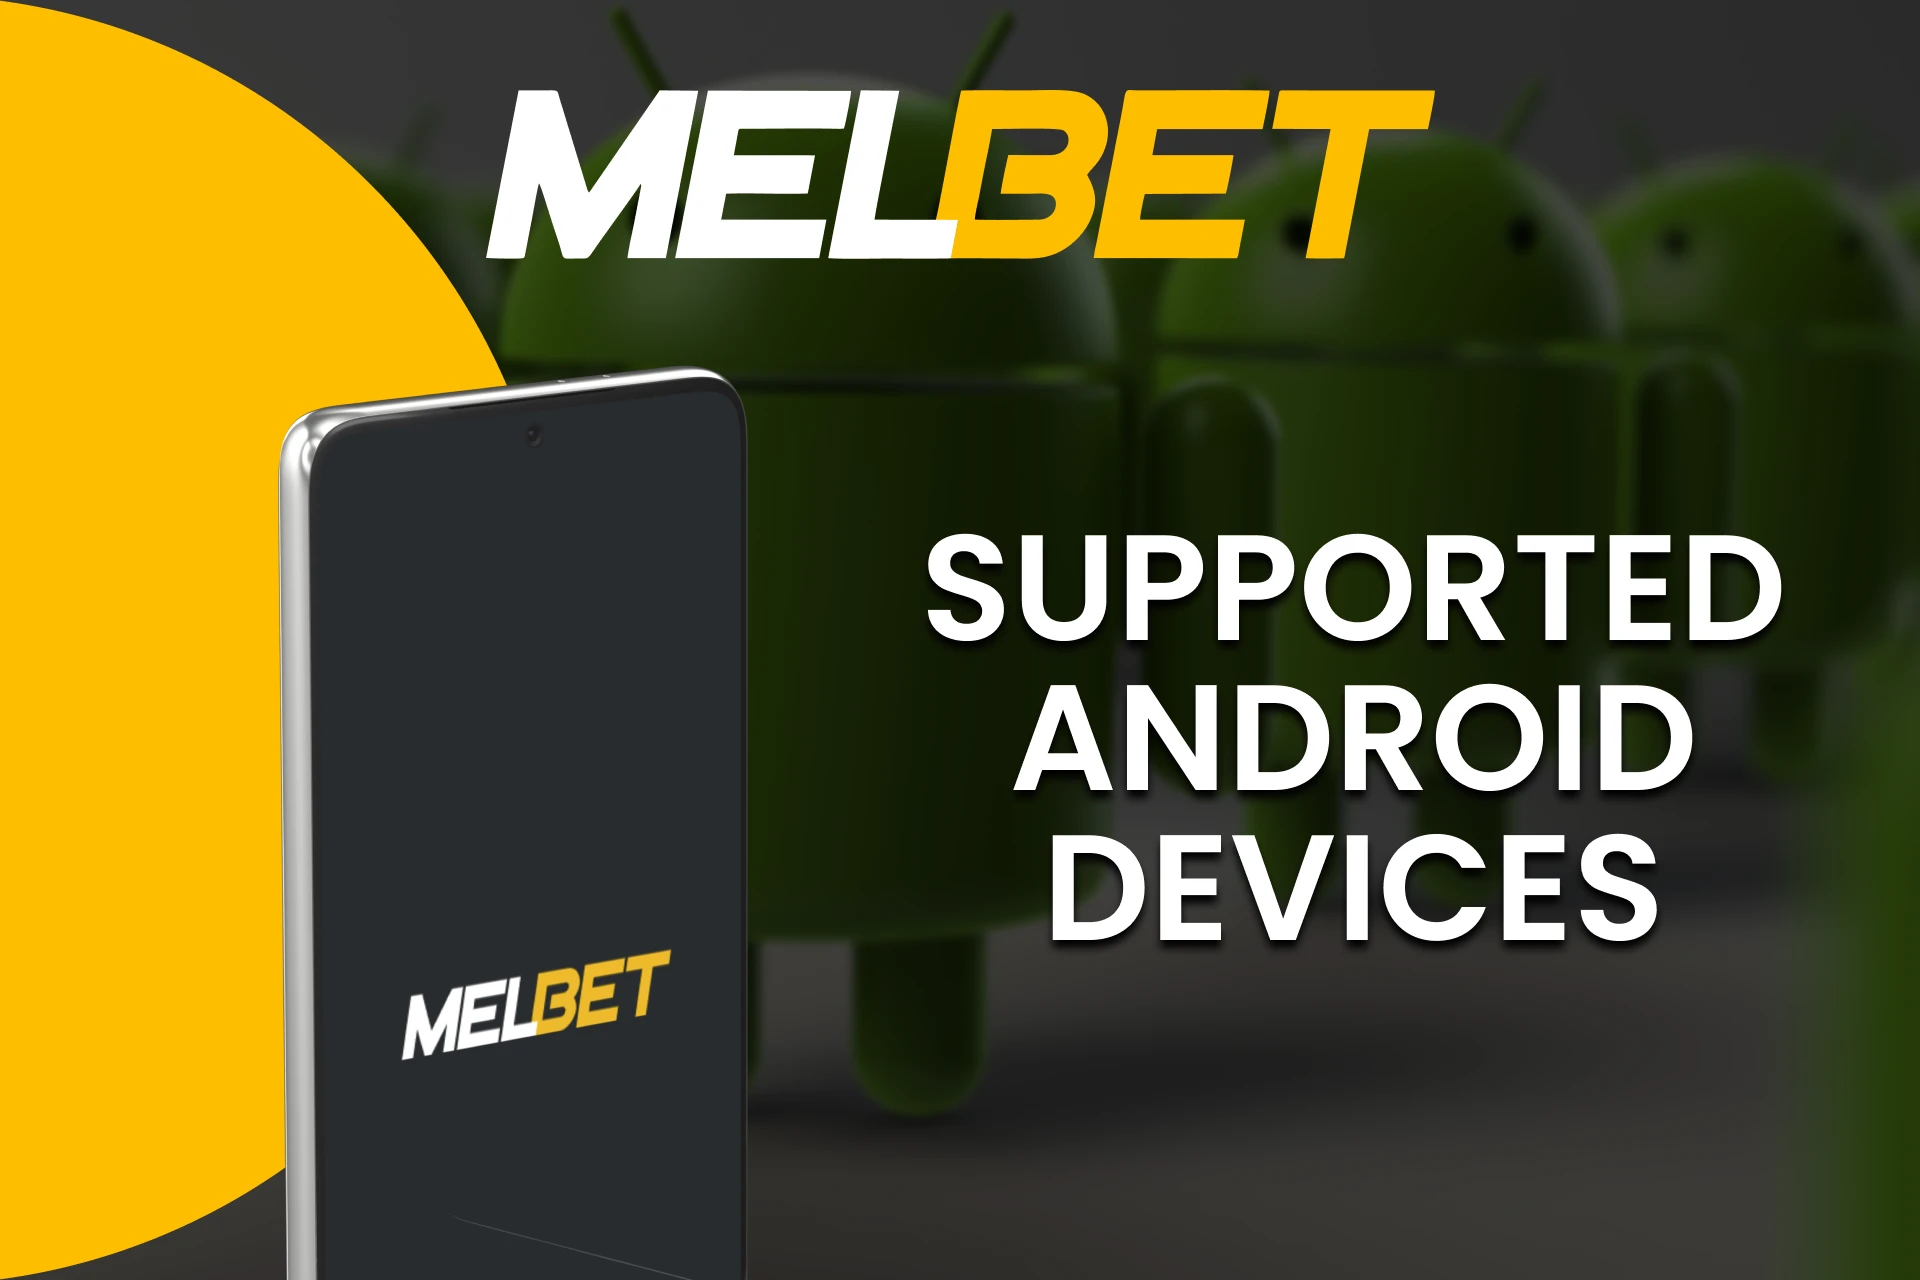 Use the Melbet service on your Android device.